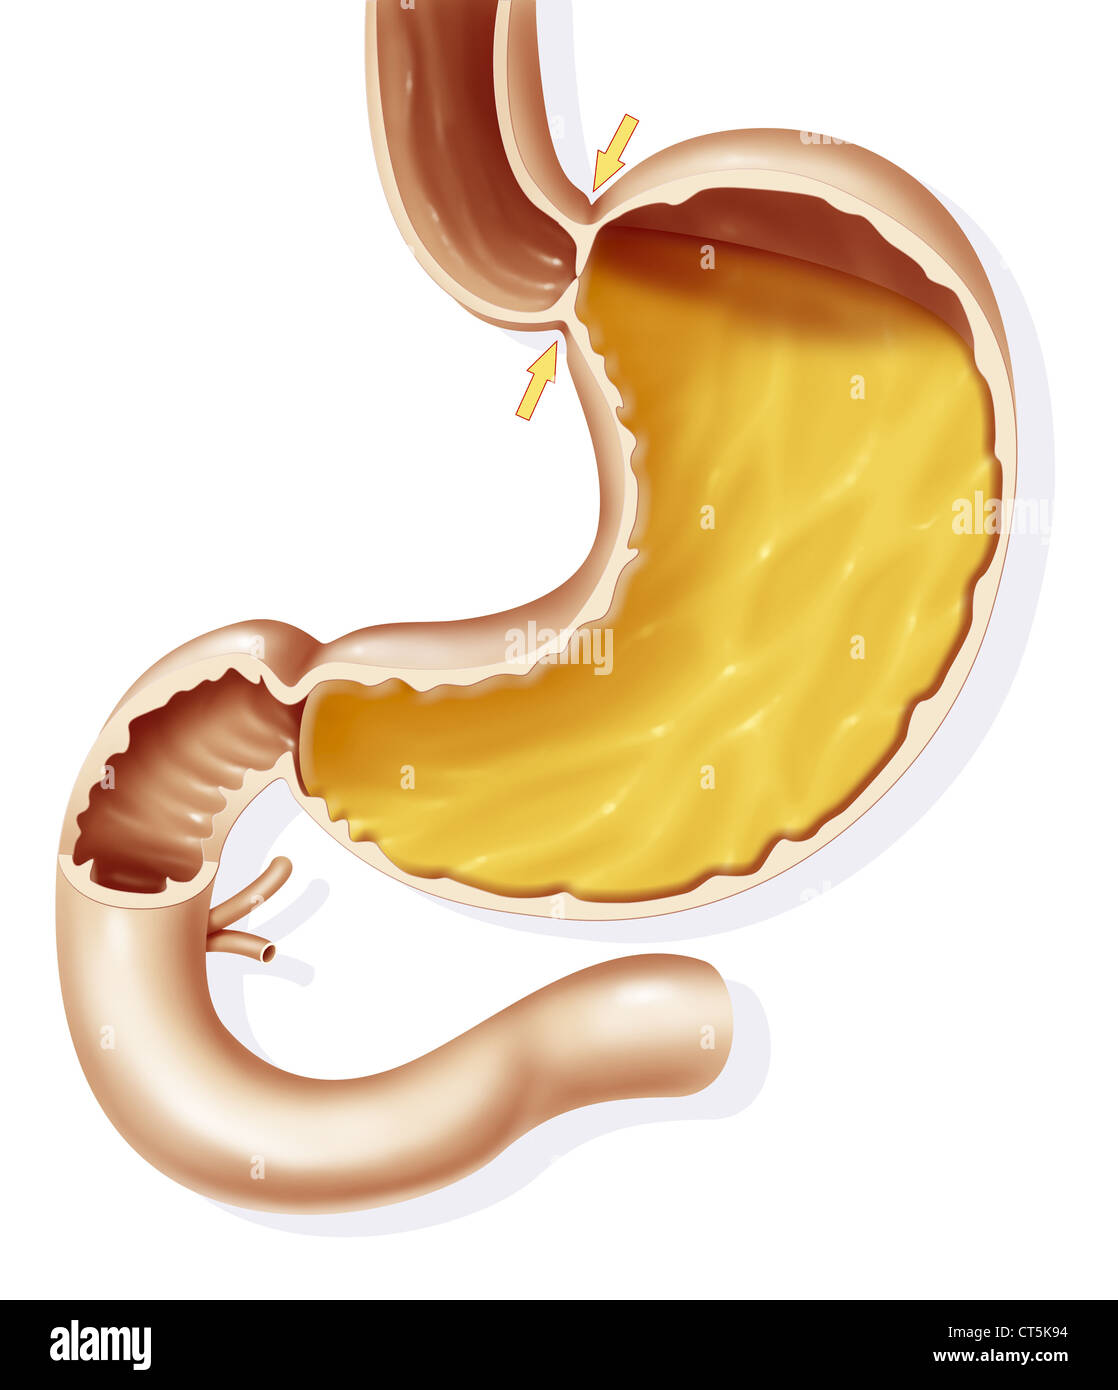 STOMACH, DRAWING Stock Photo